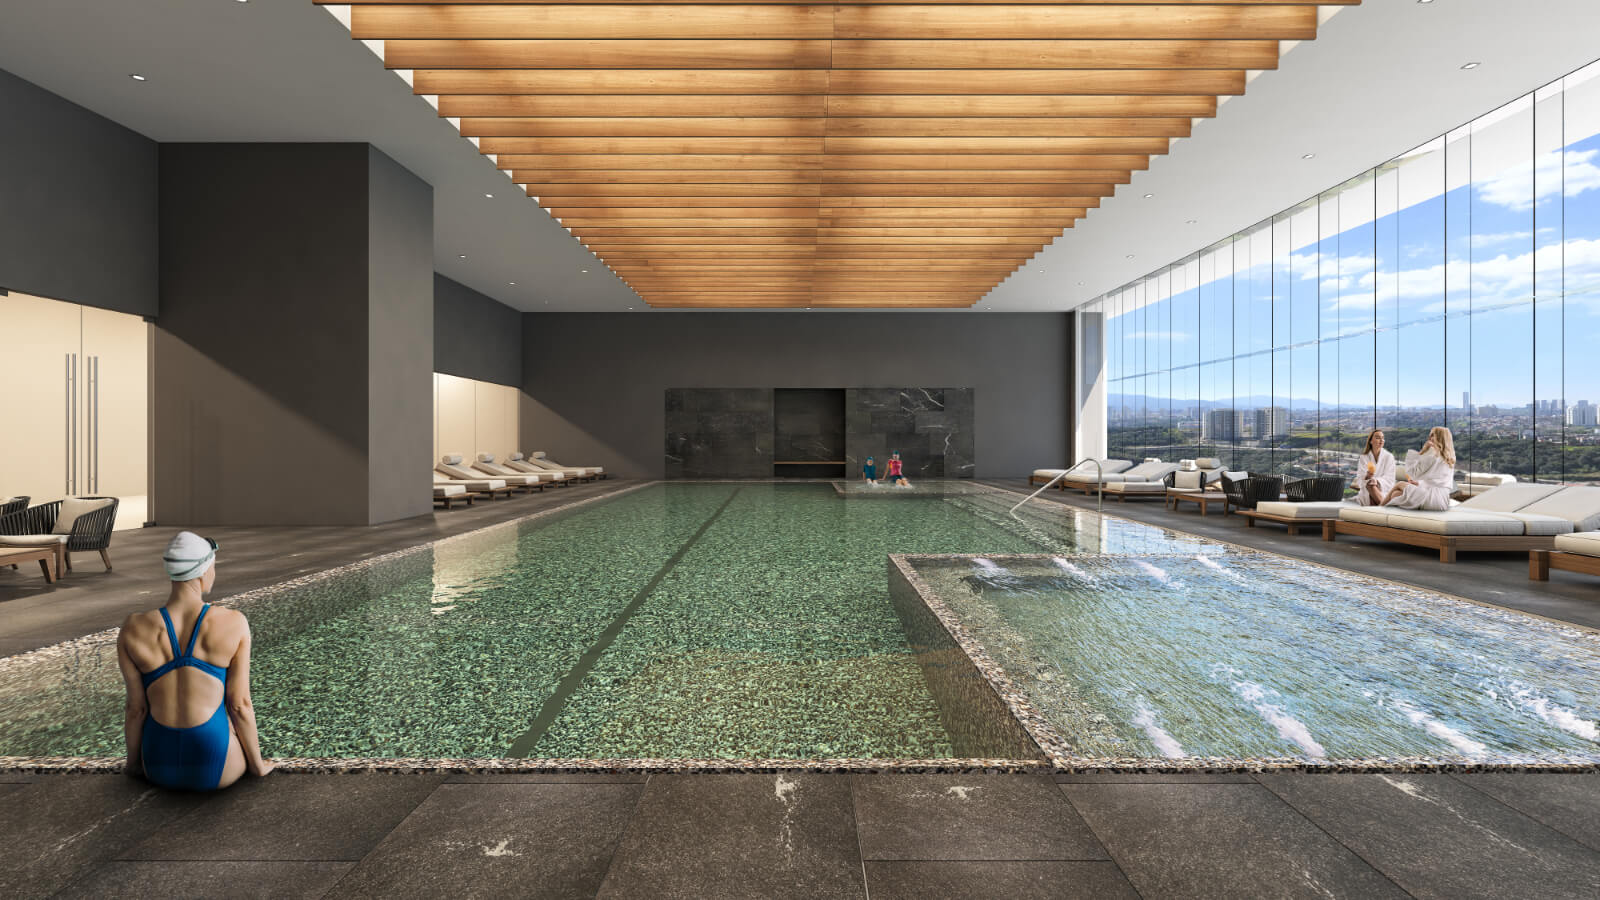 Condominium with spa pool, gym, jacuzzi, for sale in Polanco, Mexico City.